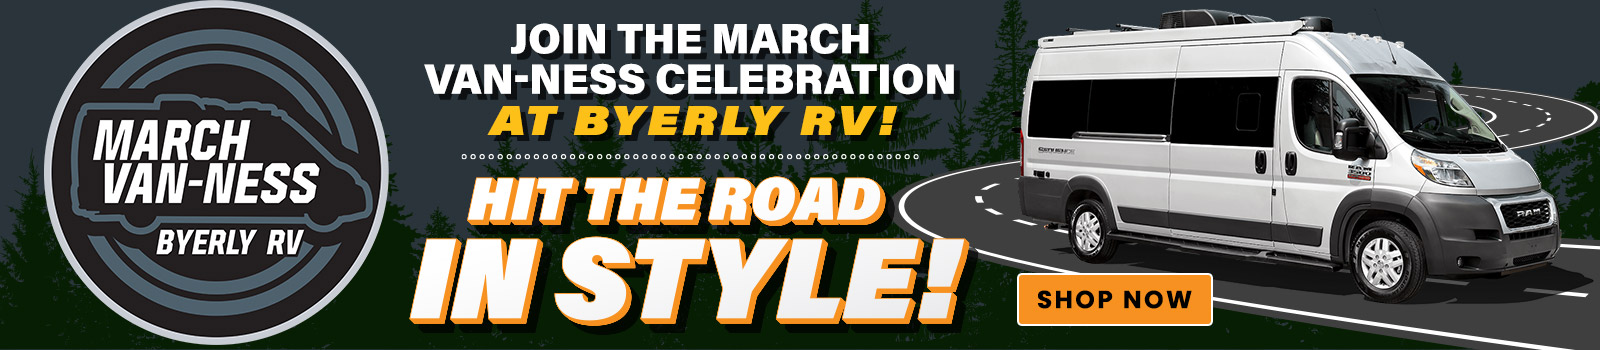 March Van-ness at Bylerly RV!